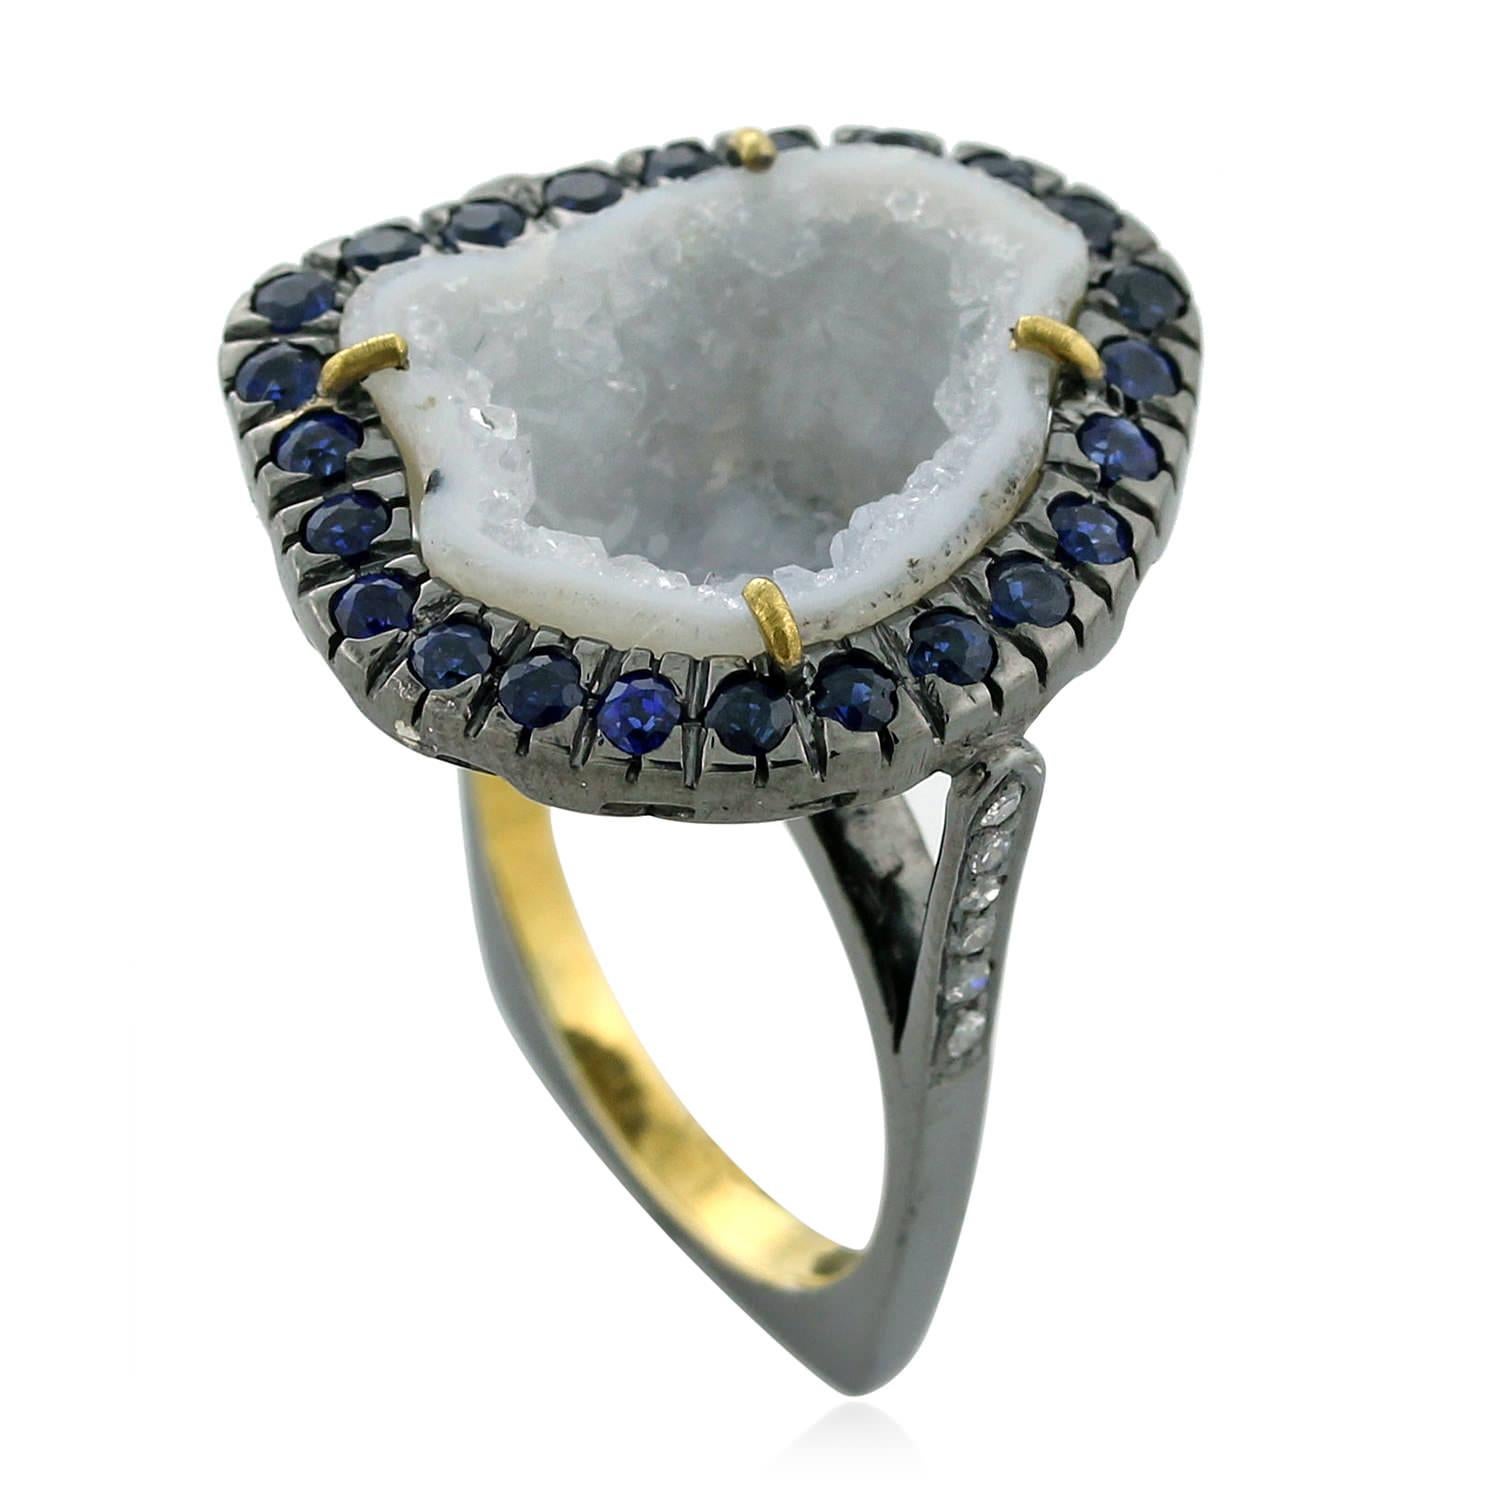 Designer One of a kind white geode with Diamonds and Sapphire set in Gold and Silver is perfect to accent with any of your denim outfits.

Ring Size: 7.25 ( Can be sized )

18kt